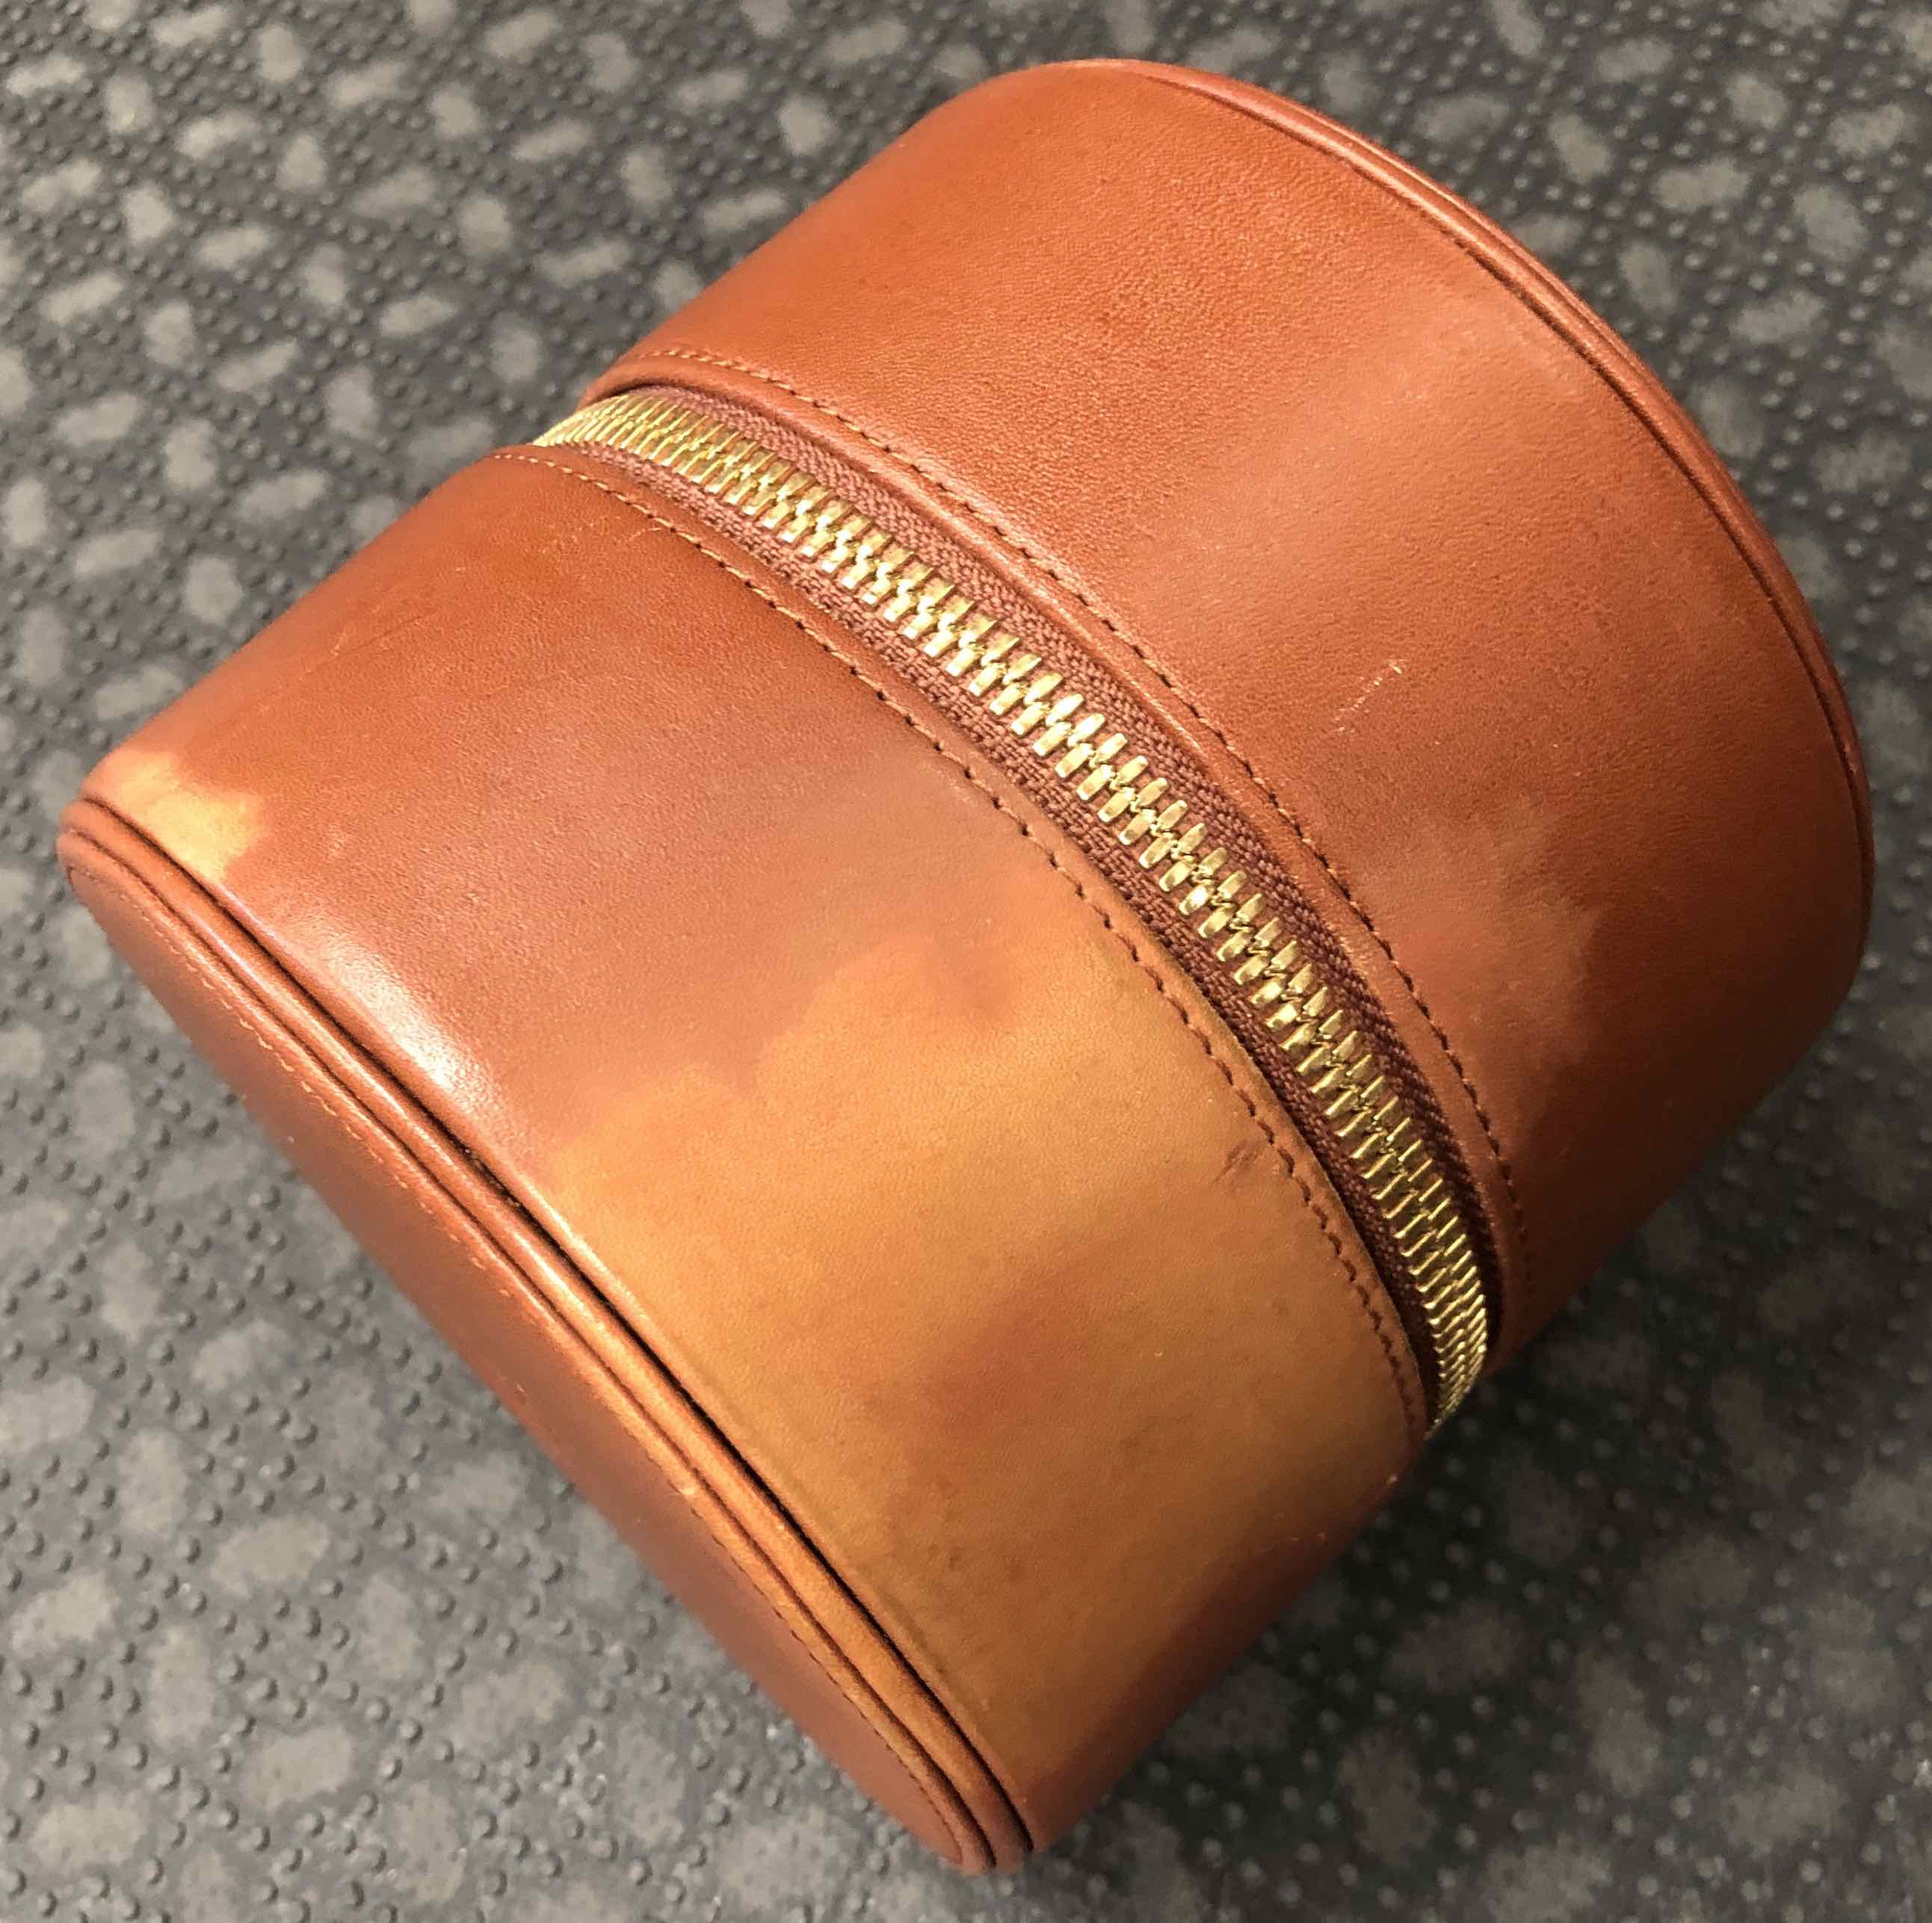 Hardy Leather Reel Case - Lambs Wool Interior - SLIGHTLY FADED - $40